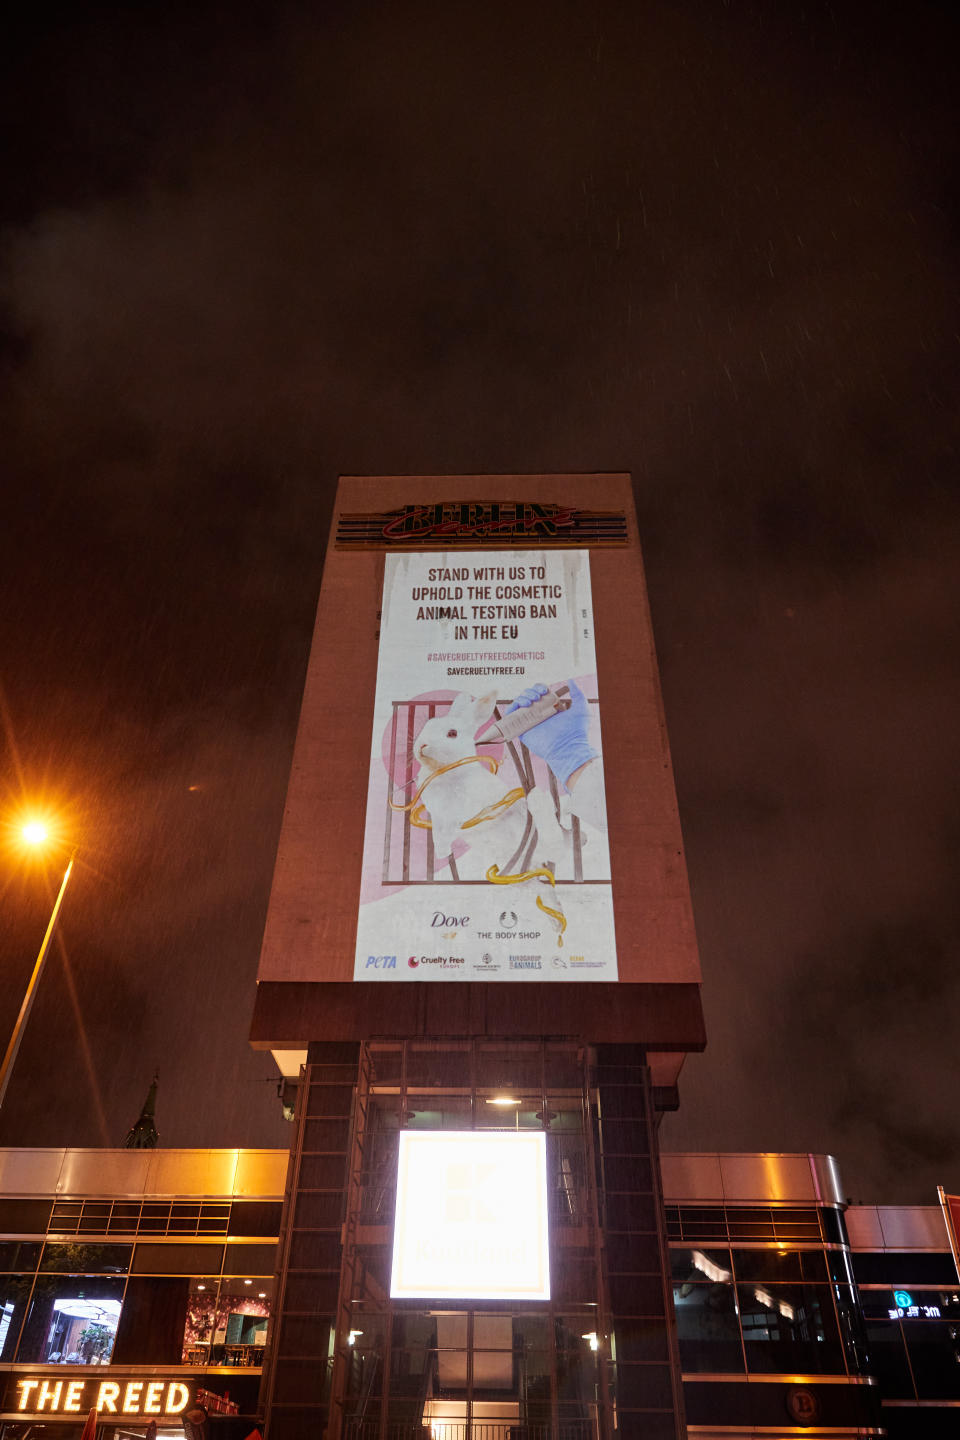 A mural from a campaign spearheaded by Dove and The Body Shop against animal testing in the U.K. and Europe. - Credit: Image Courtesy of Sebastian Reuter